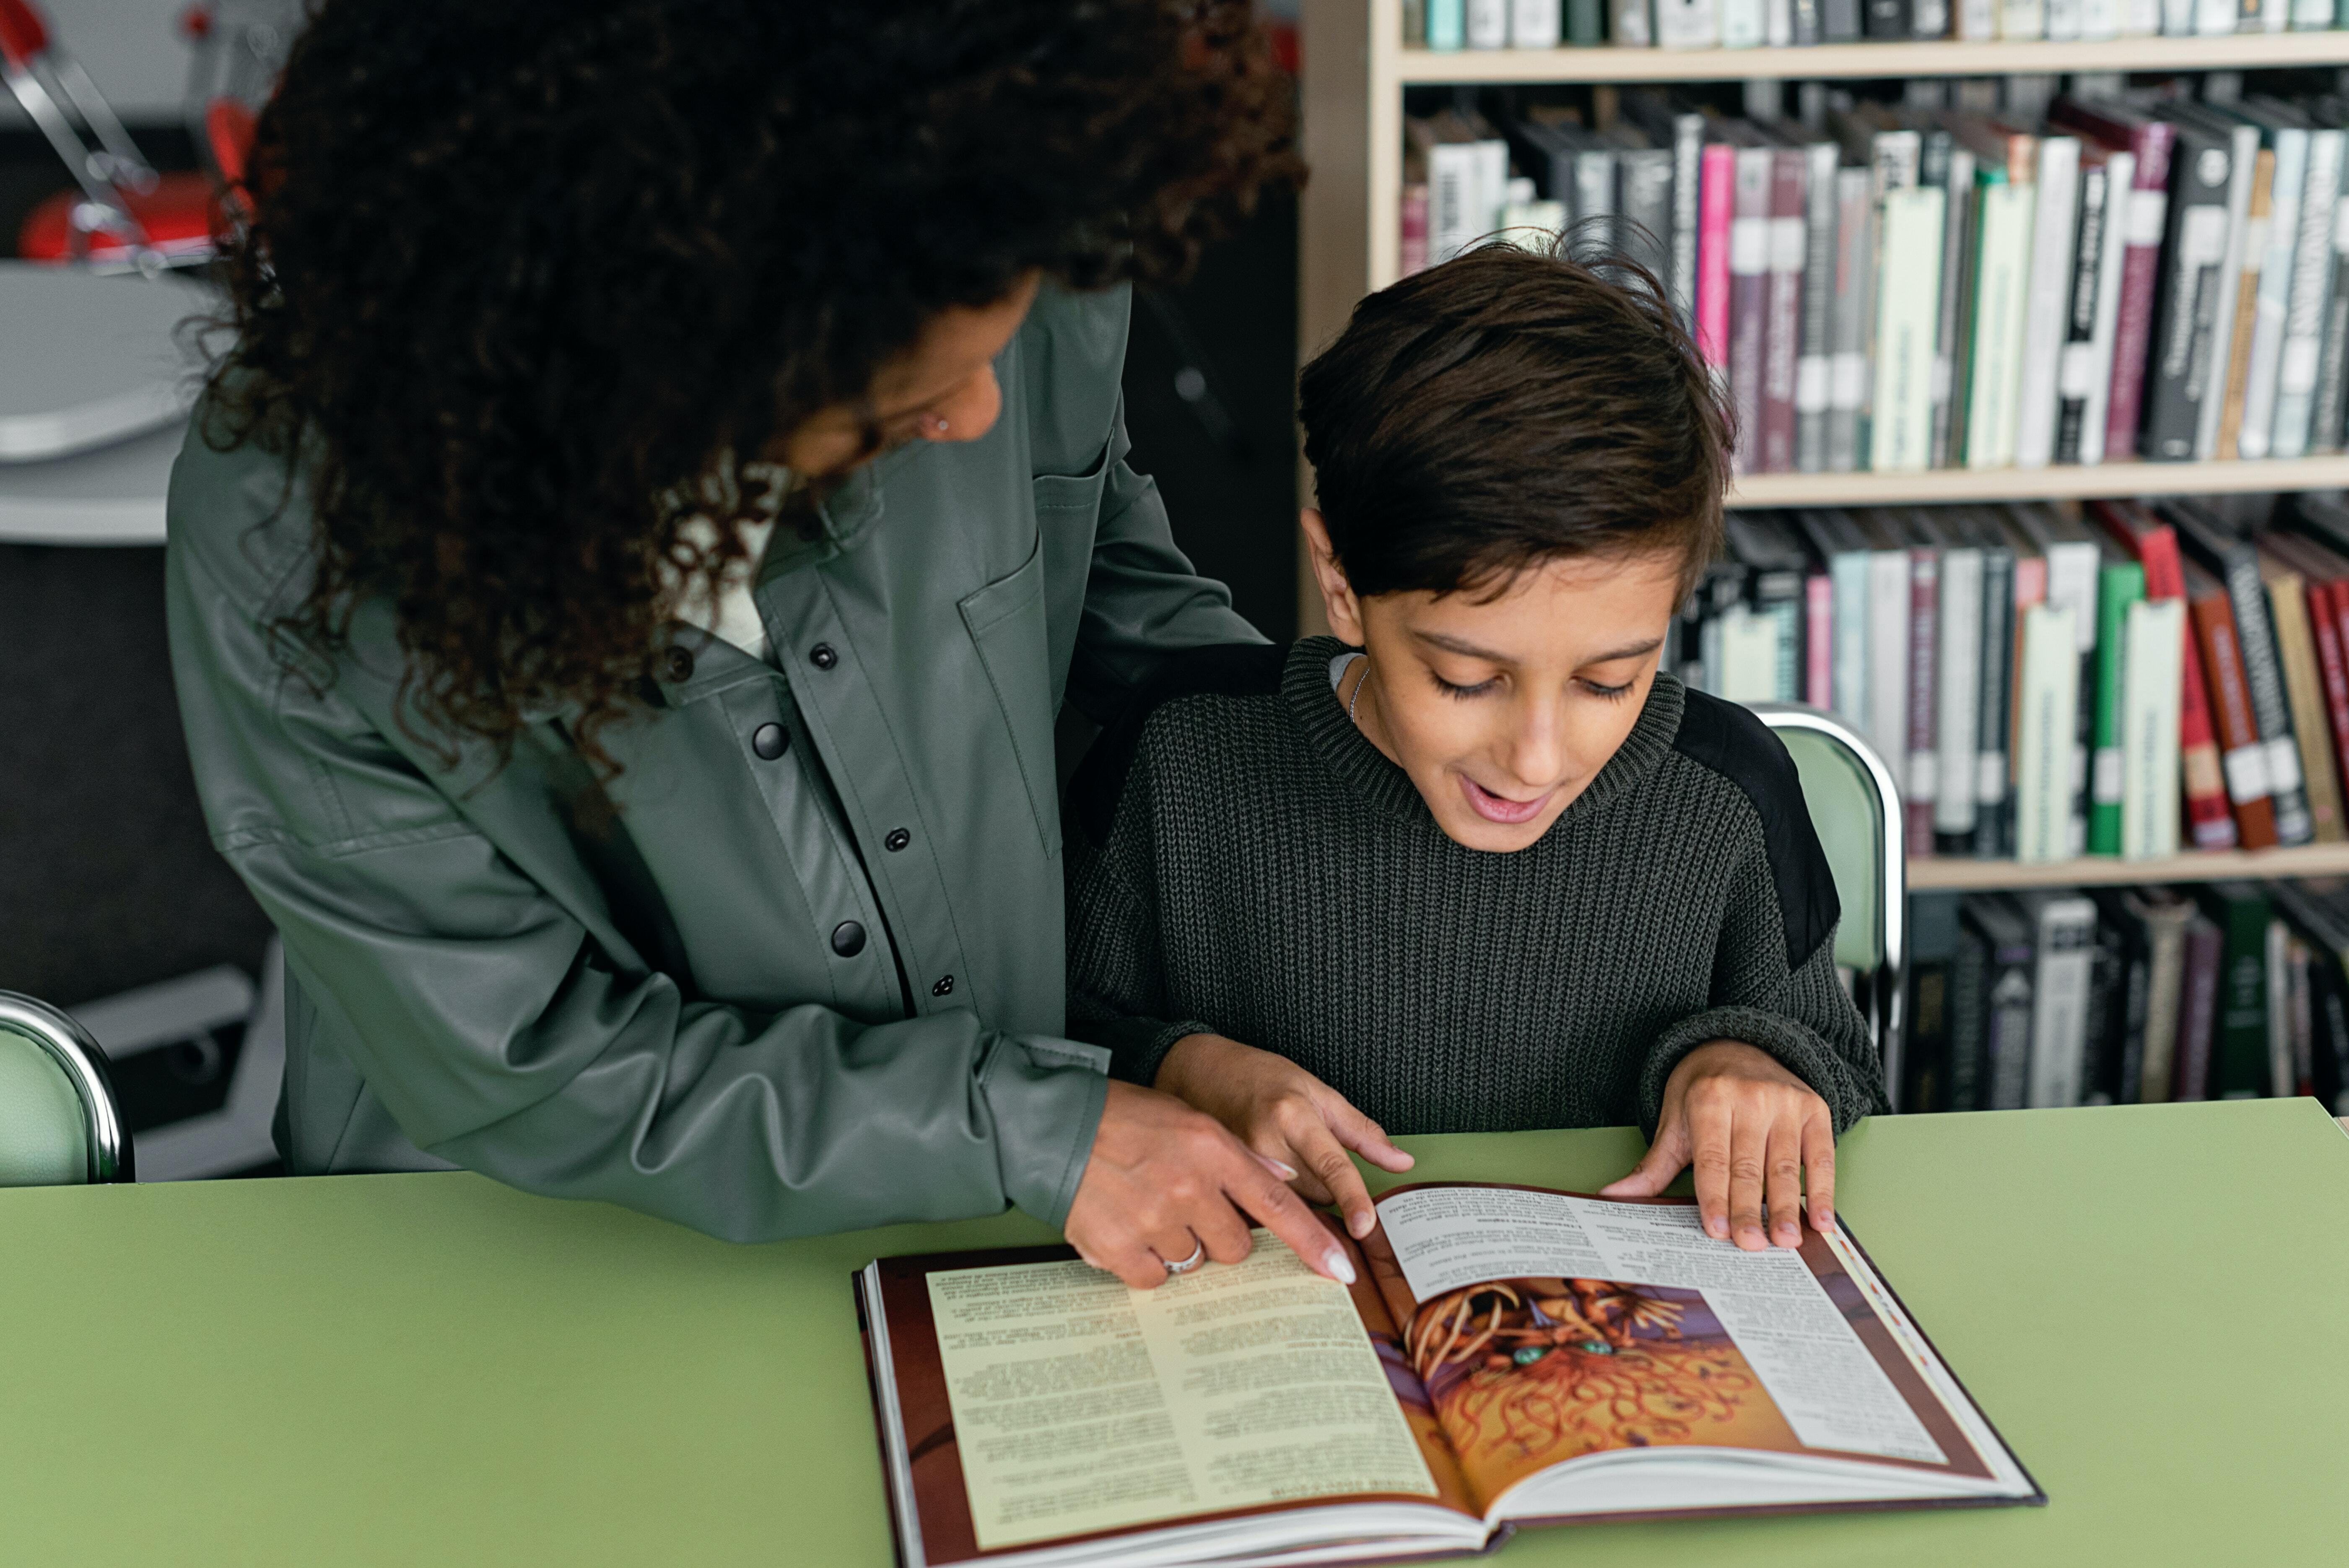 A woman and a child reading a book in a library